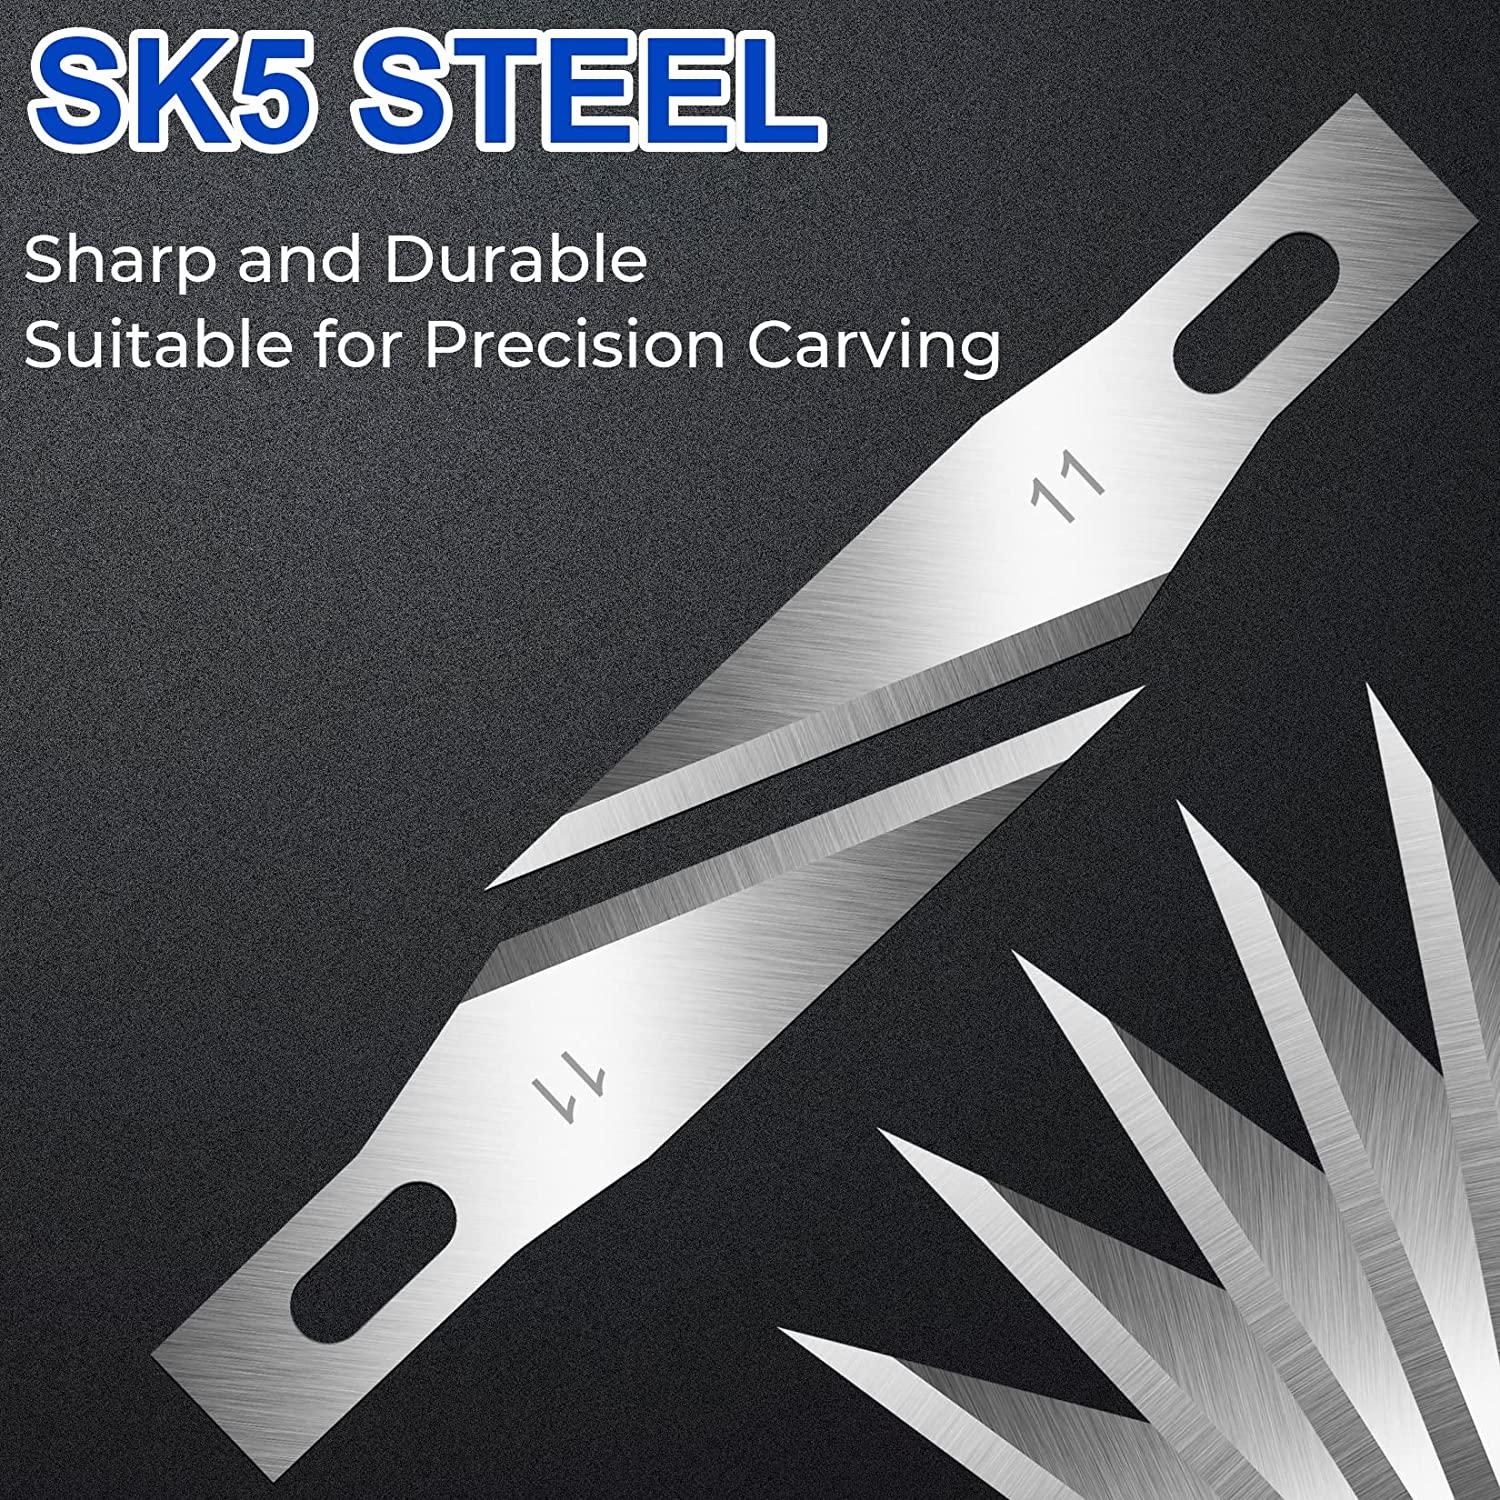 DIYSELF 50 PCS Exacto Knife Blades, High Carbon Steel #11 Refill Exacto Art  Blades Cutting Tool with Storage Case for Craft, Hobby